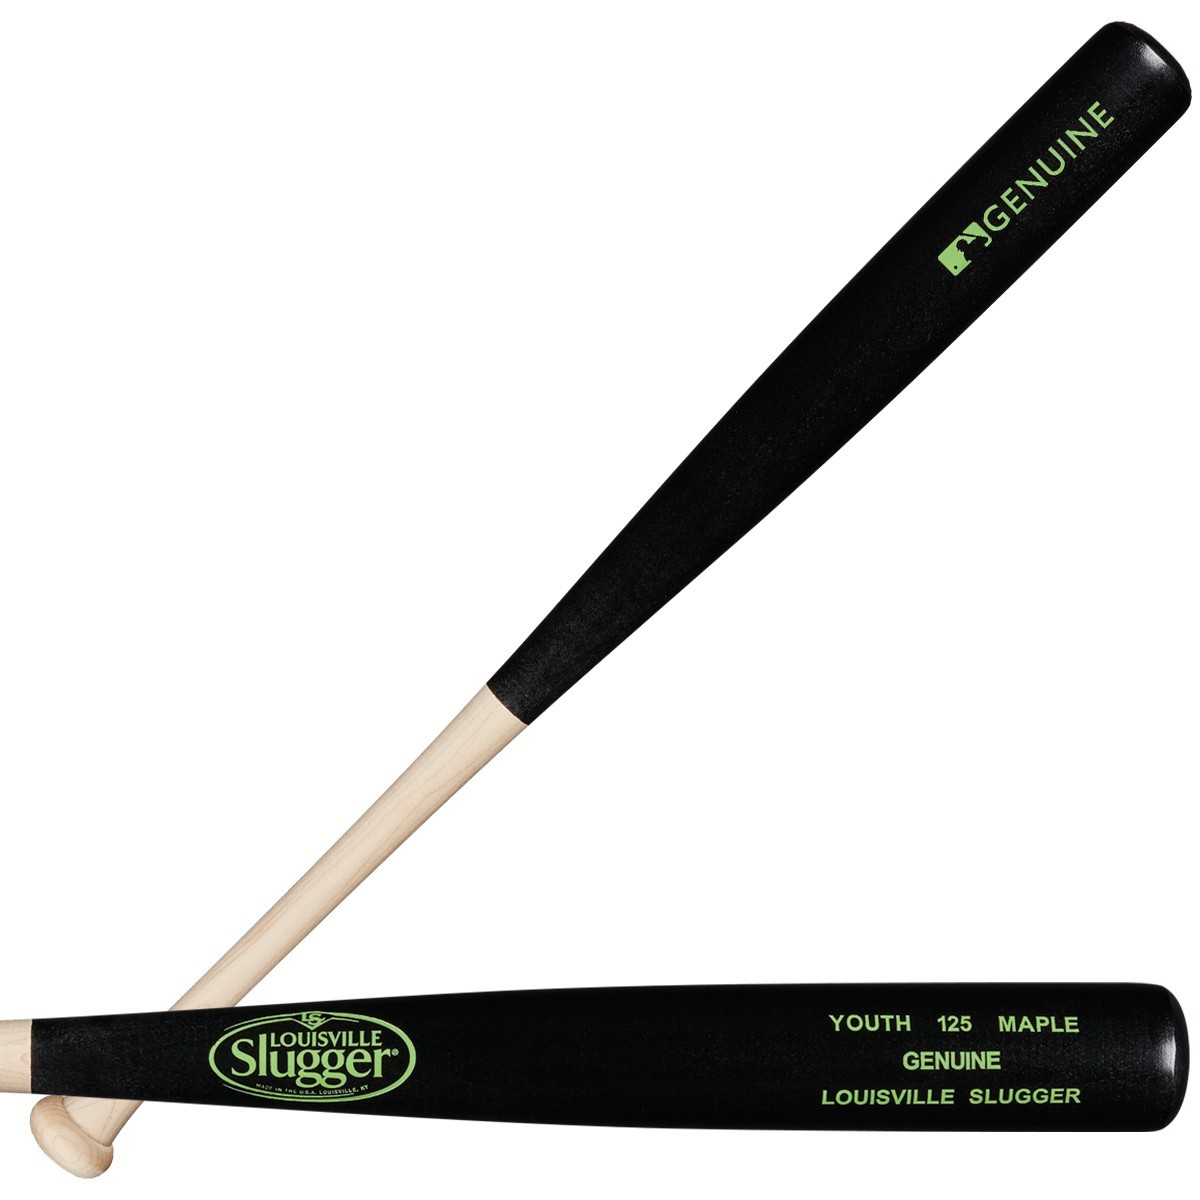 louisville-slugger-youth-125-maple-genuine-wood-baseball-bat-31-inch WTLWYM125A1631 Louisville 887768509071 Priced for every budget and built from dependable maple wood youth